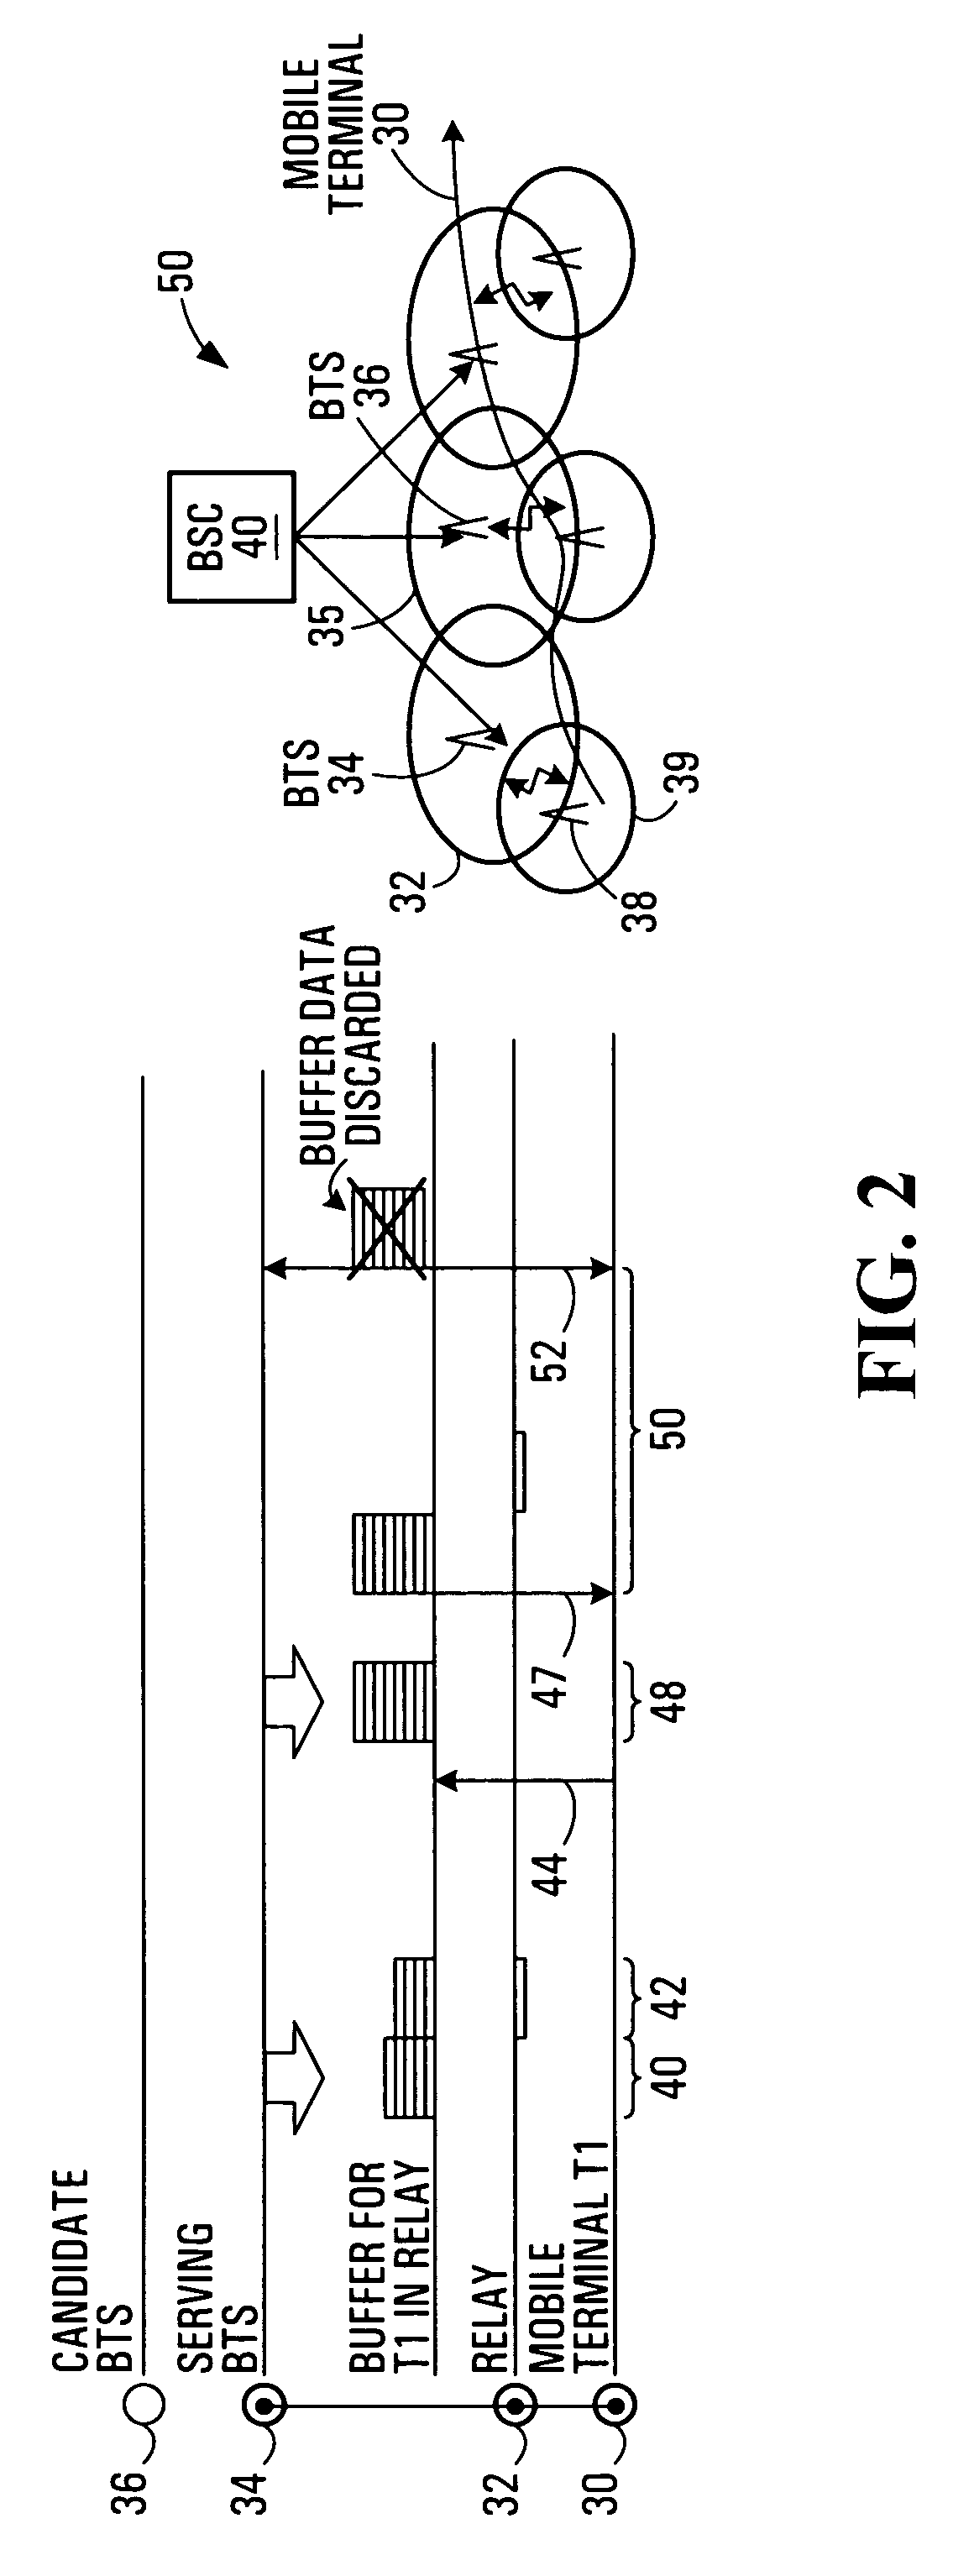 Method and system of flow control in multi-hop wireless access networks